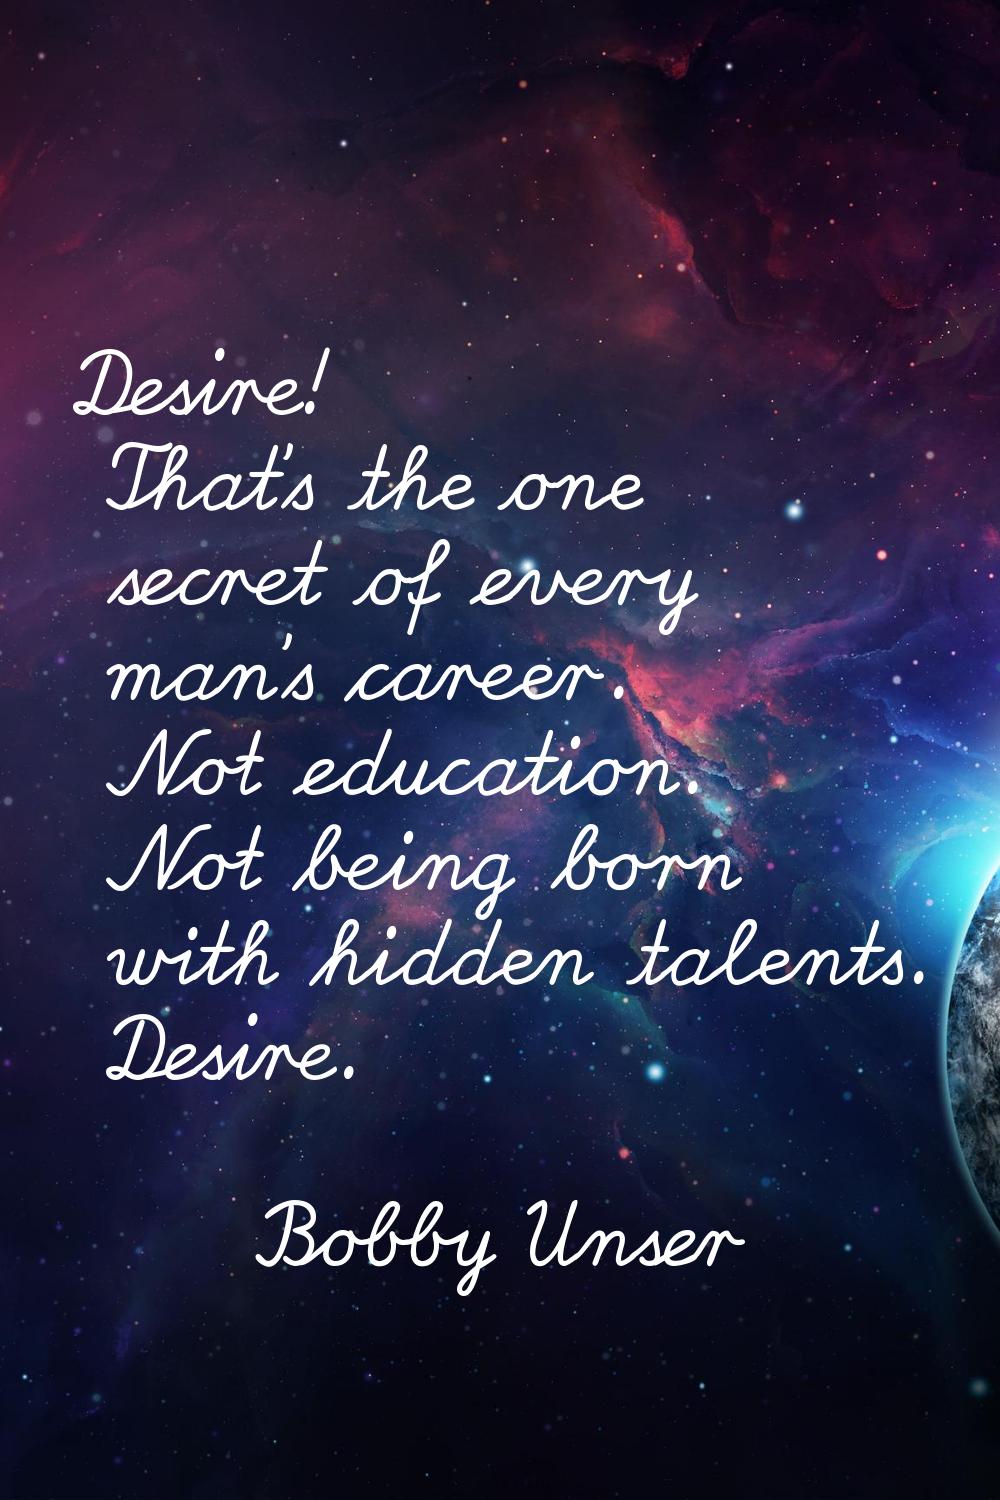 Desire! That's the one secret of every man's career. Not education. Not being born with hidden tale